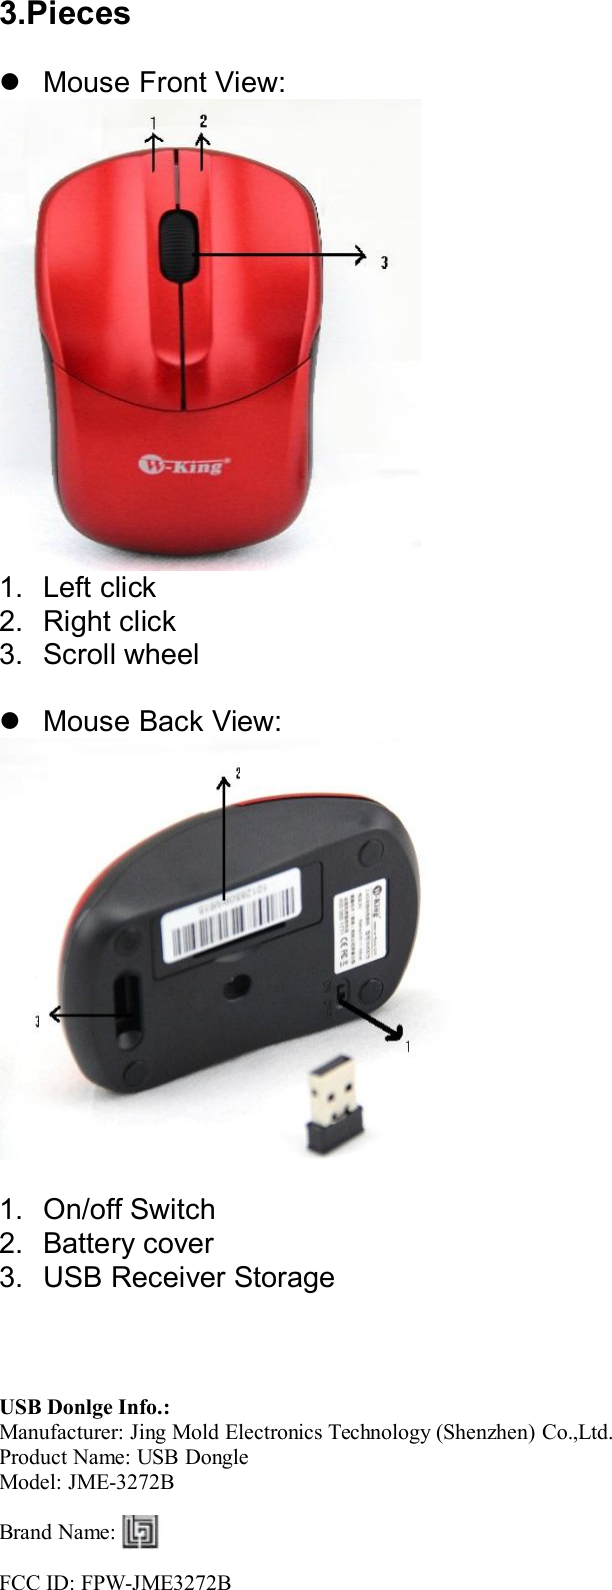 3.PiecesMouse Front View:1. Left click2. Right click3. Scroll wheelMouse Back View:1. On/off Switch2. Battery cover3. USB Receiver StorageUSB Donlge Info.:Manufacturer: Jing Mold Electronics Technology (Shenzhen) Co.,Ltd.Product Name: USB DongleModel: JME-3272BBrand Name:FCC ID: FPW-JME3272B